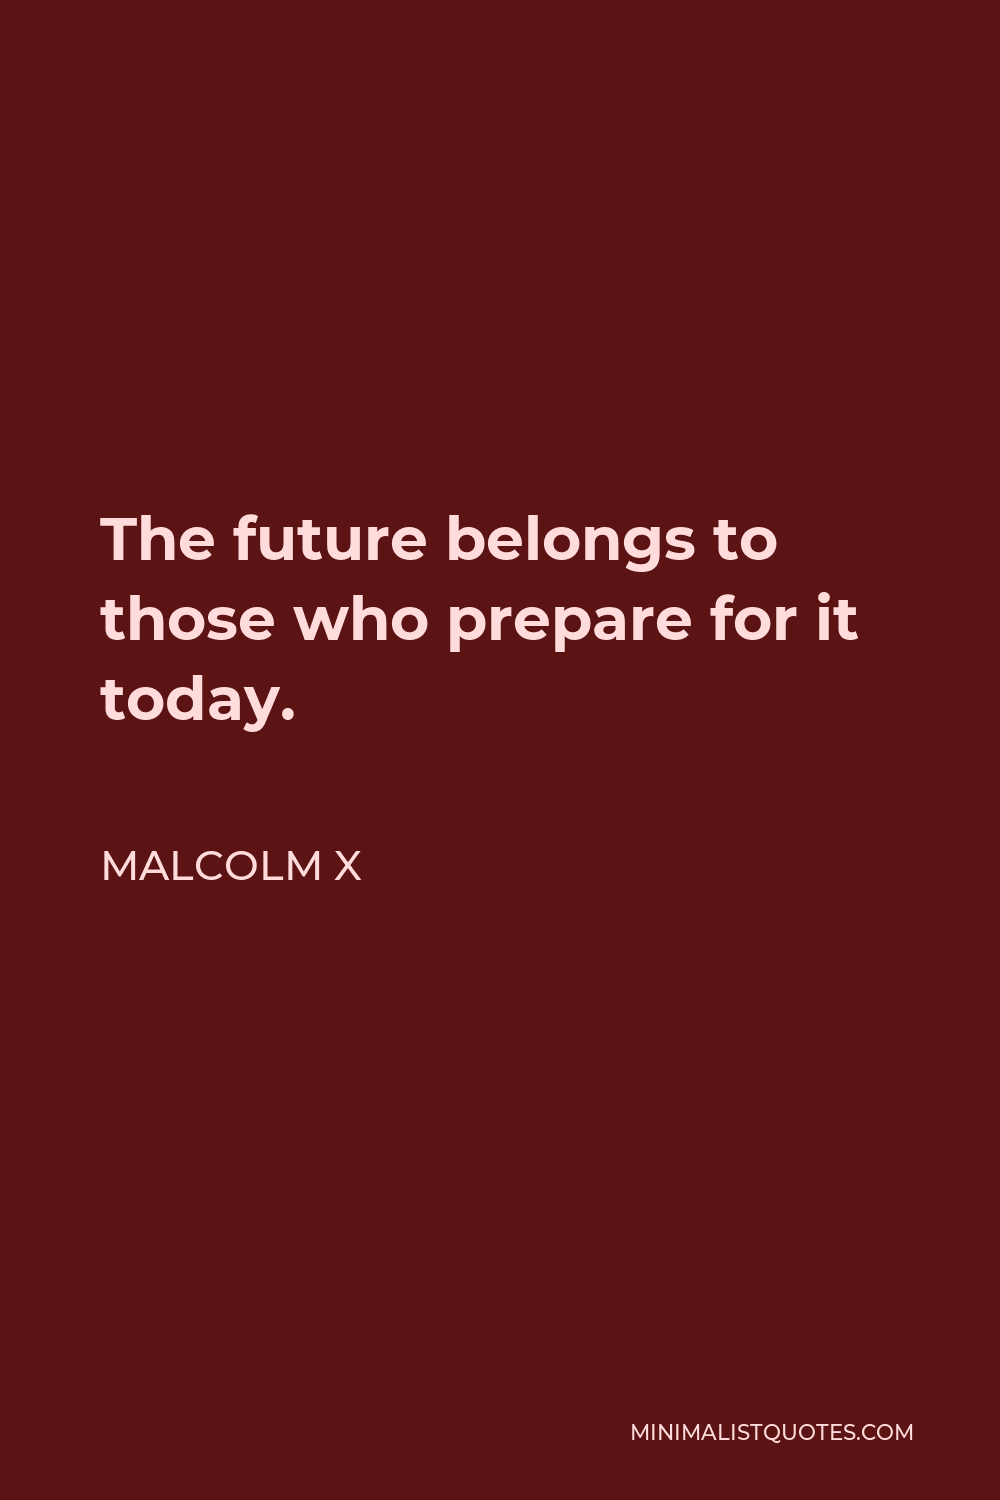 Malcolm X Quote - The future belongs to those who prepare for it today.